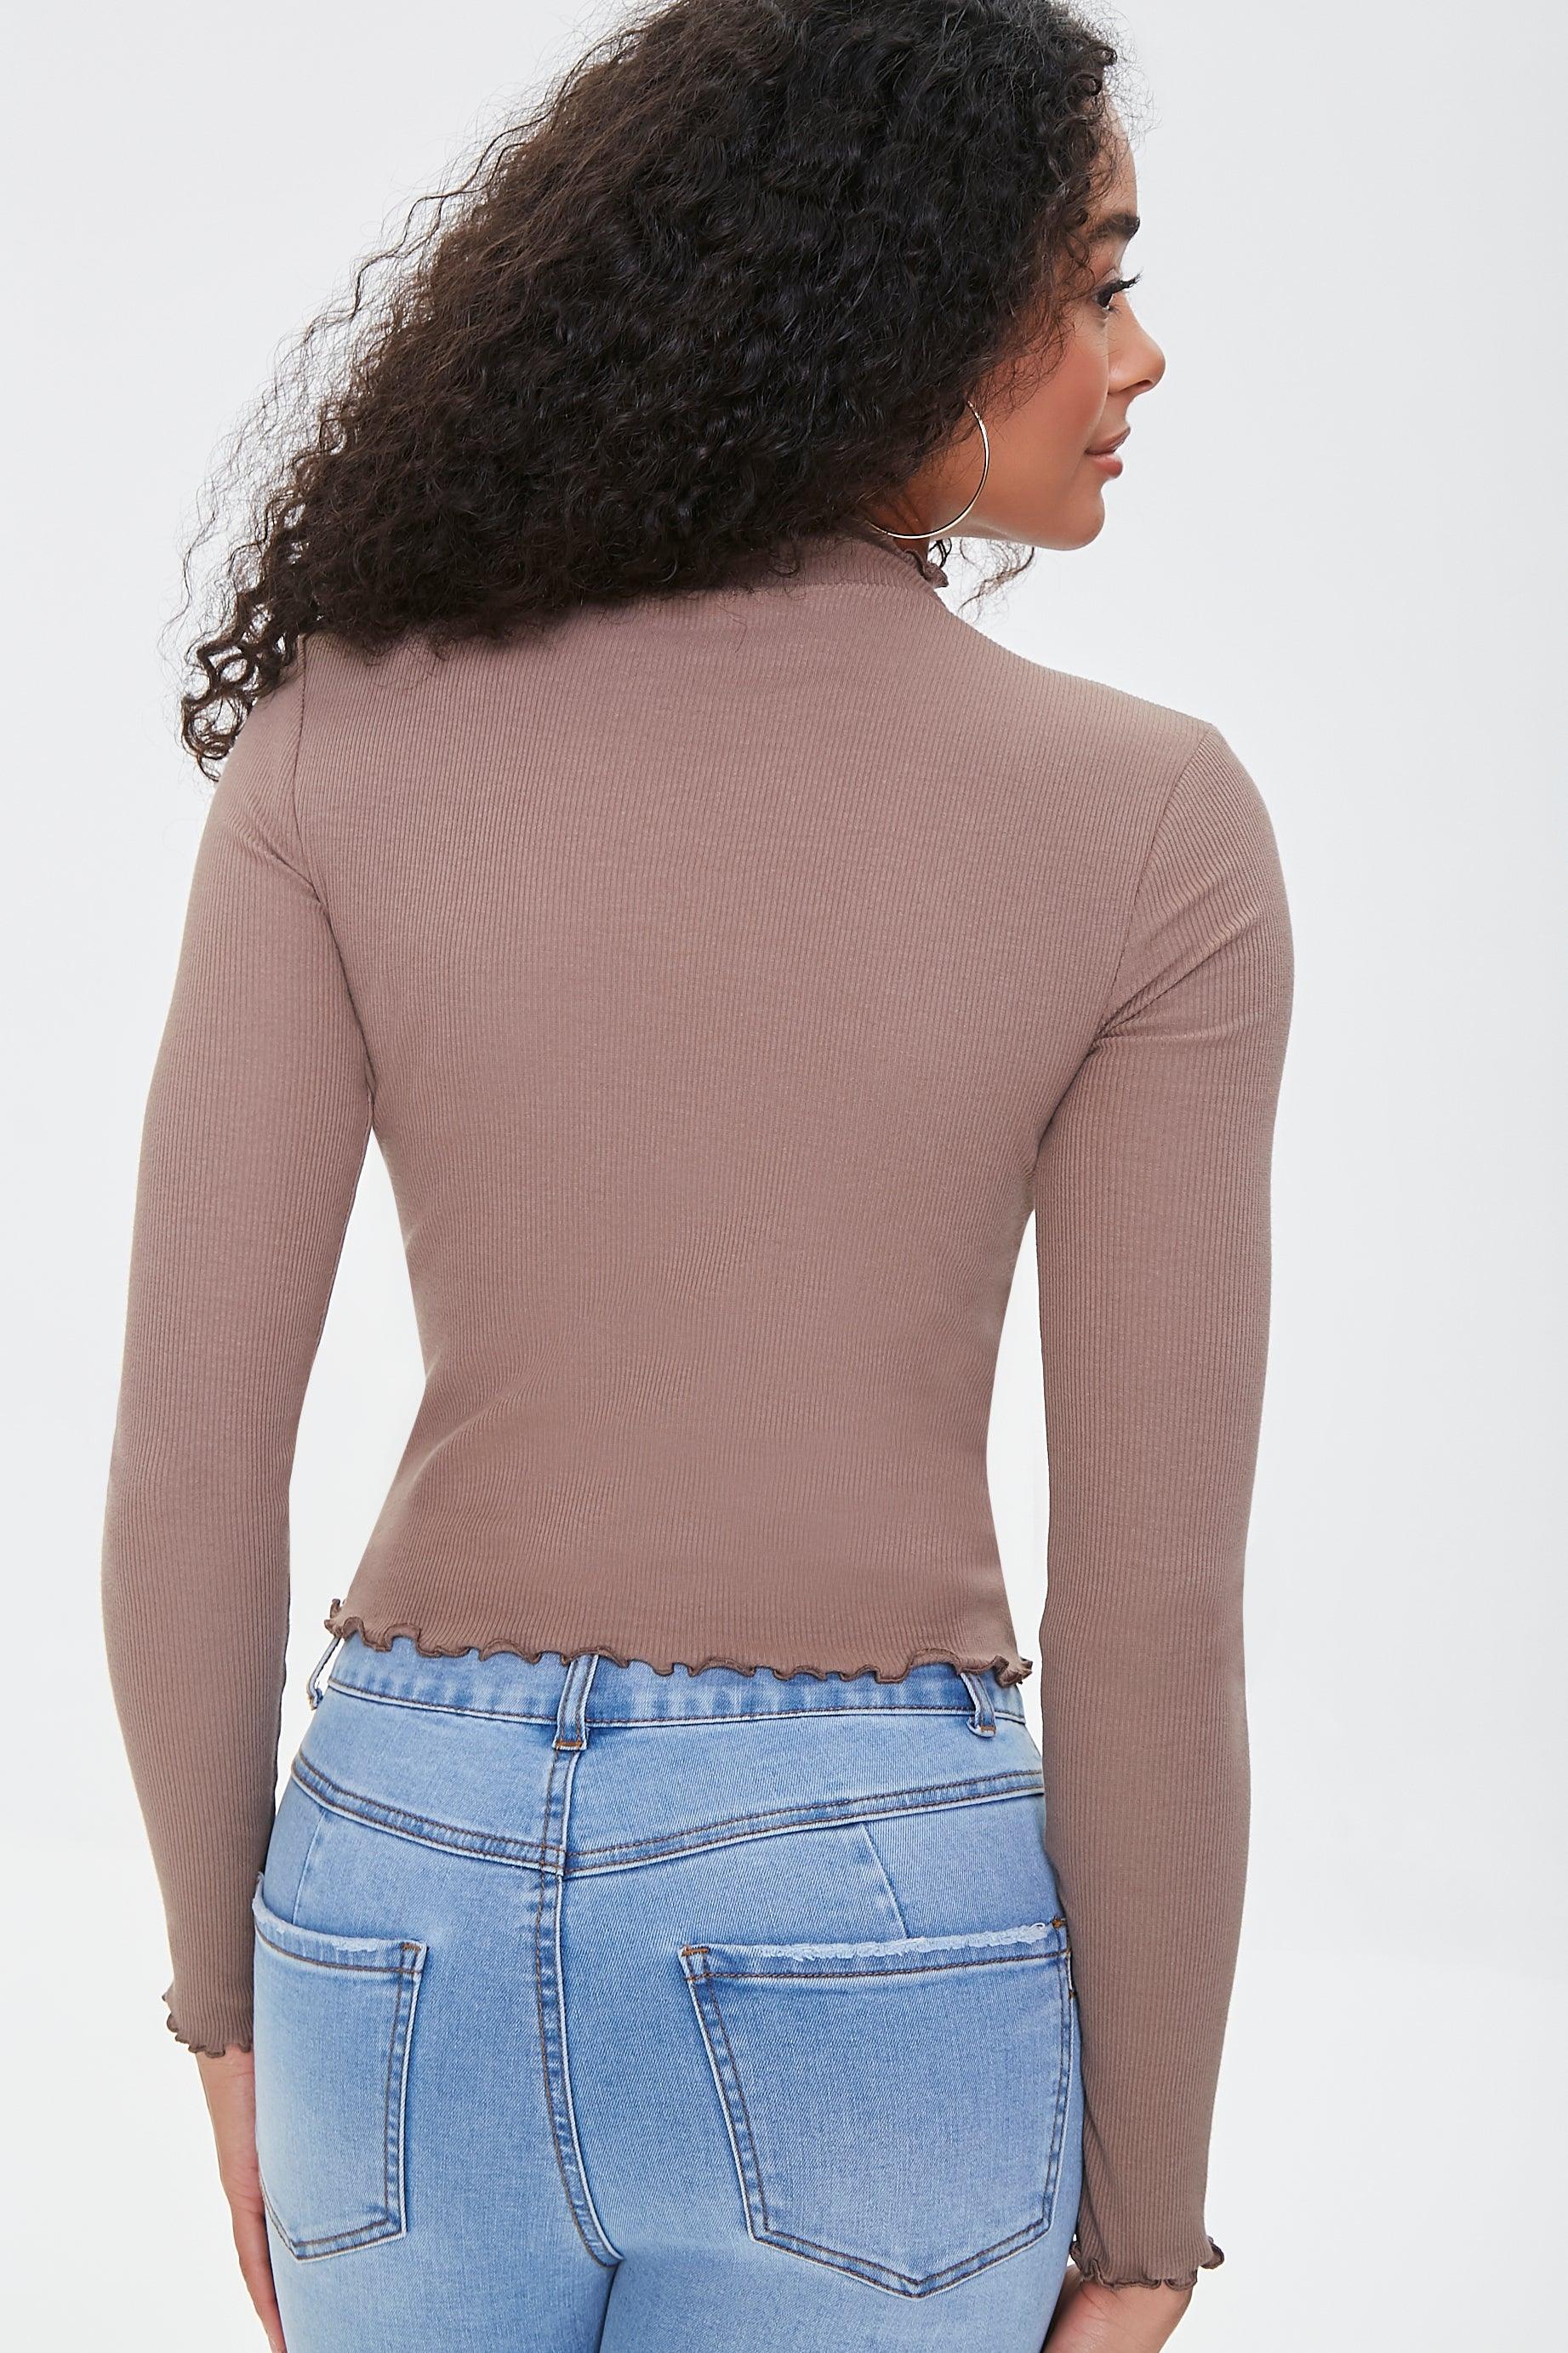 Only lettuce edge high neck ribbed top in brown